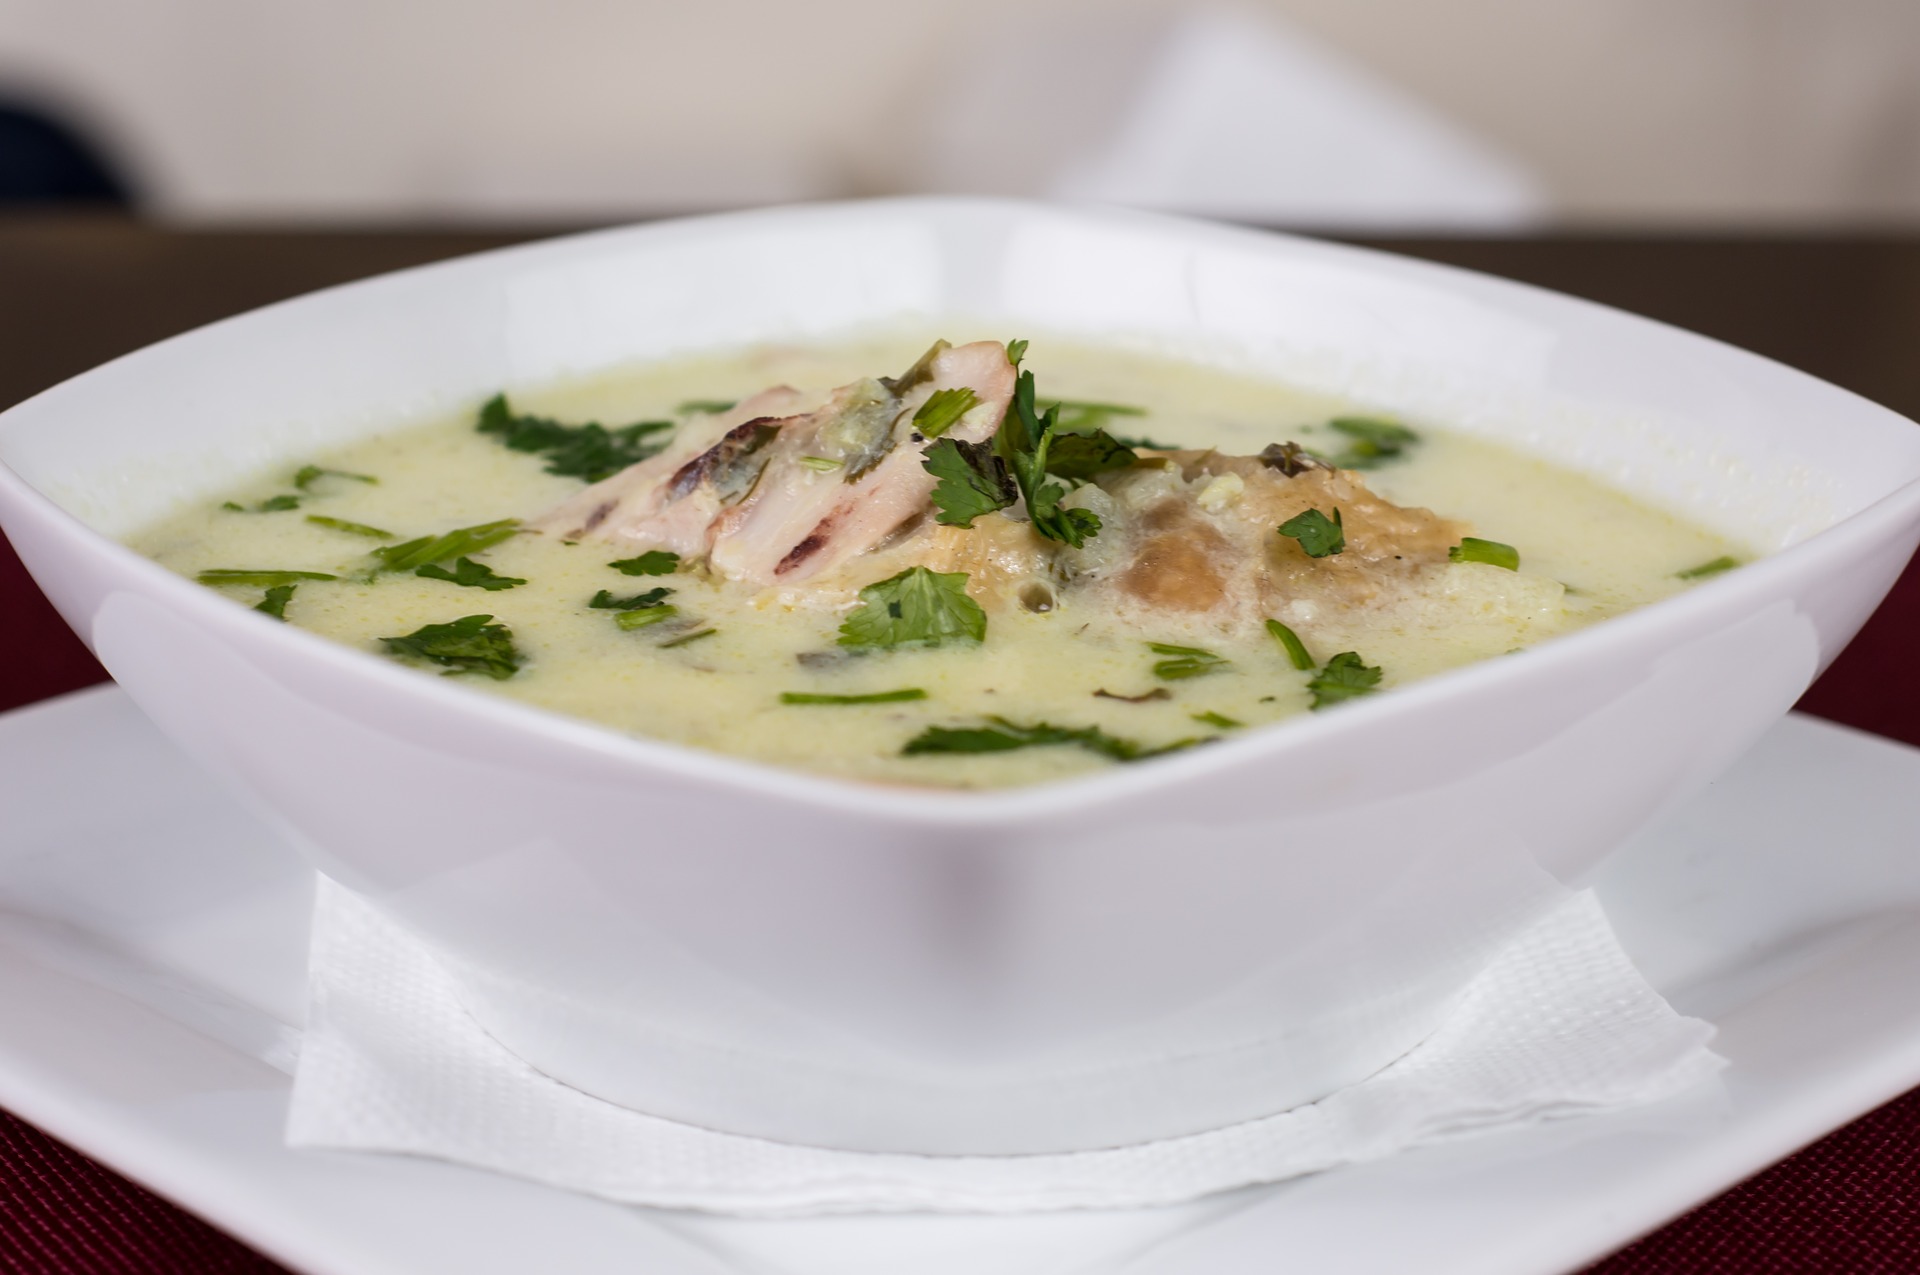 Chef's Choice: Green Chile and Chicken Soup